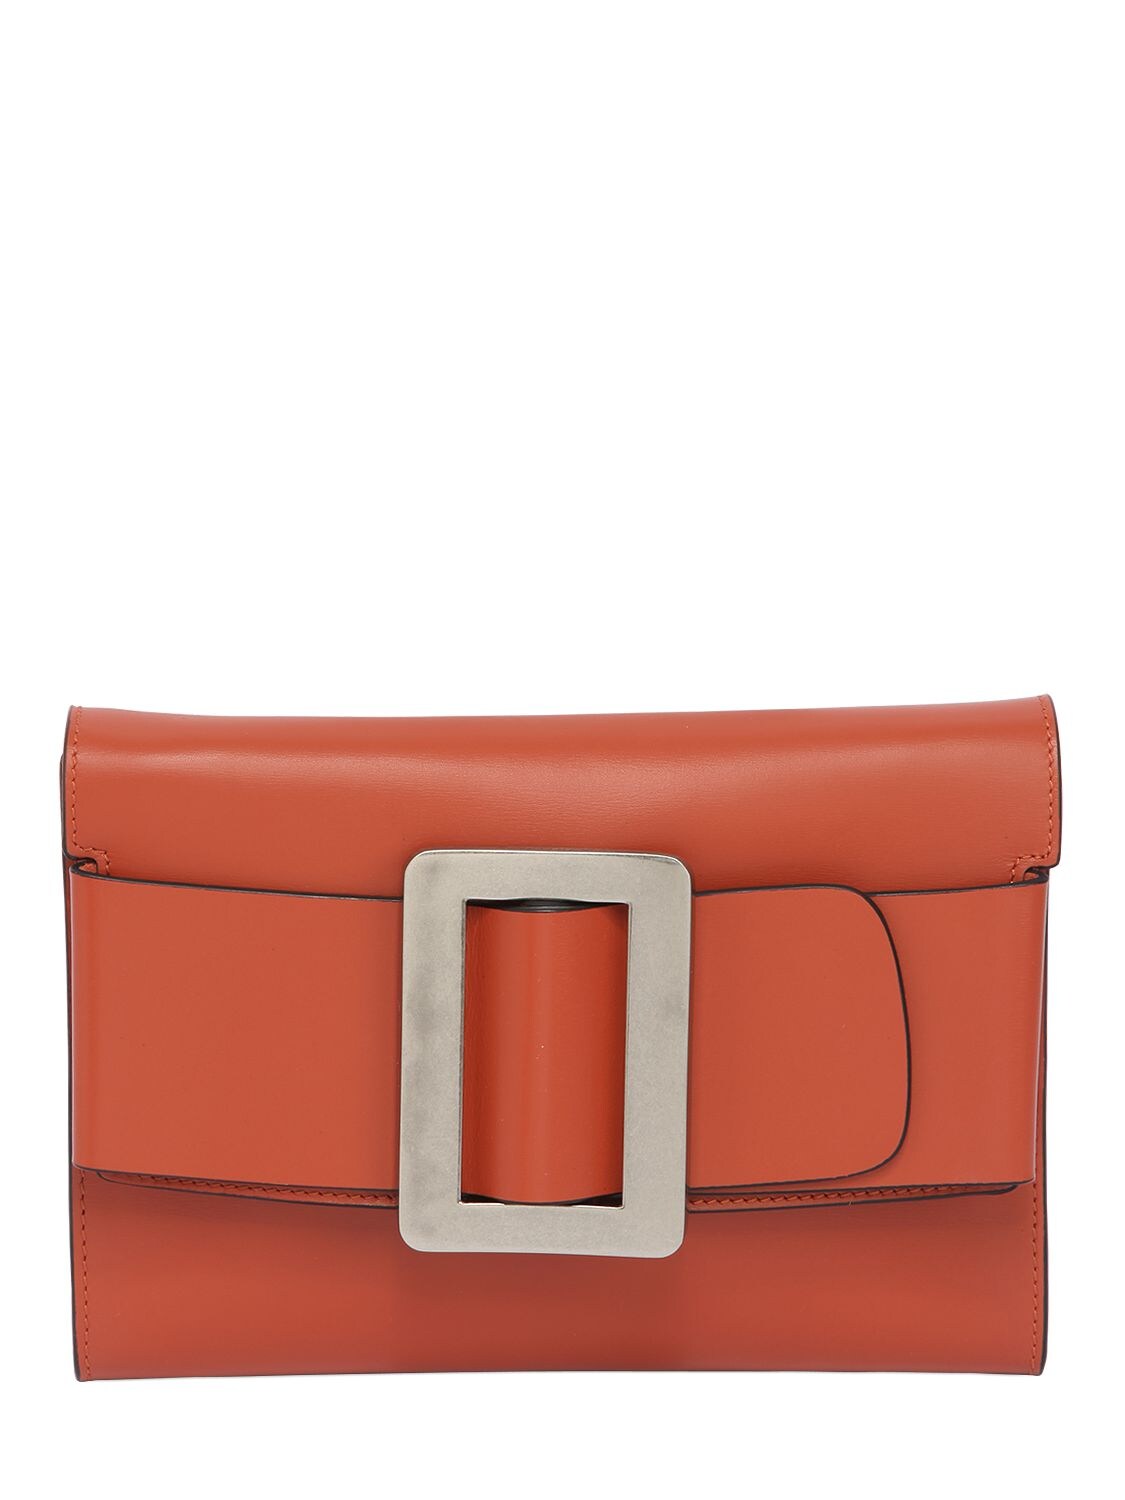 BUCKLE TRAVEL LEATHER CLUTCH